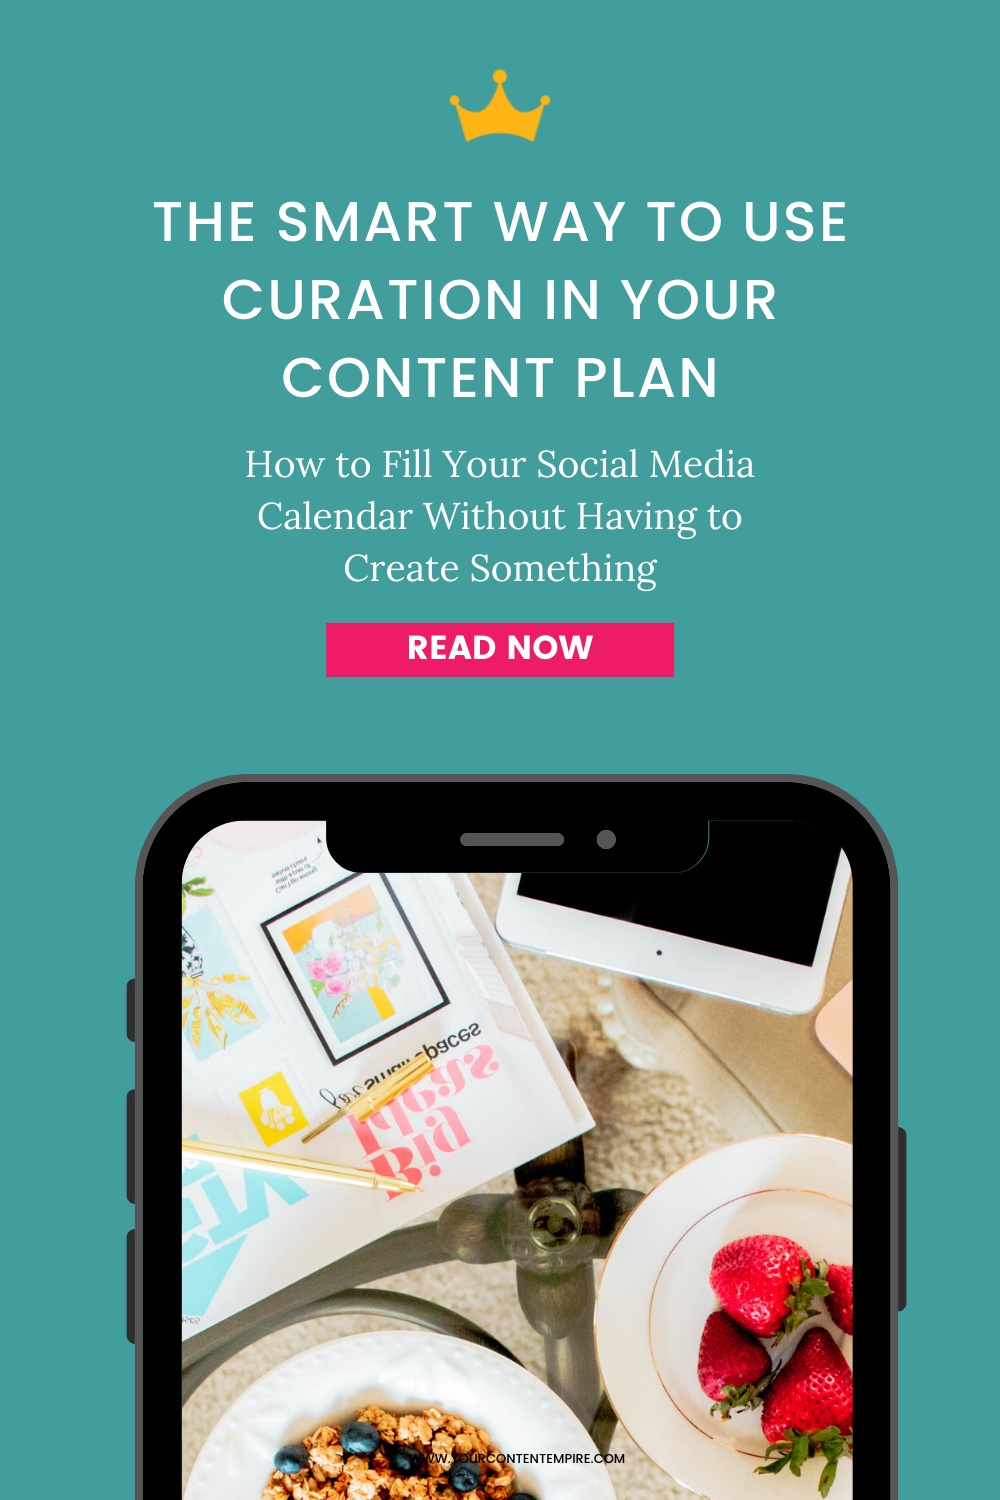 The Smart Way to Use Curation in Your Content Plan